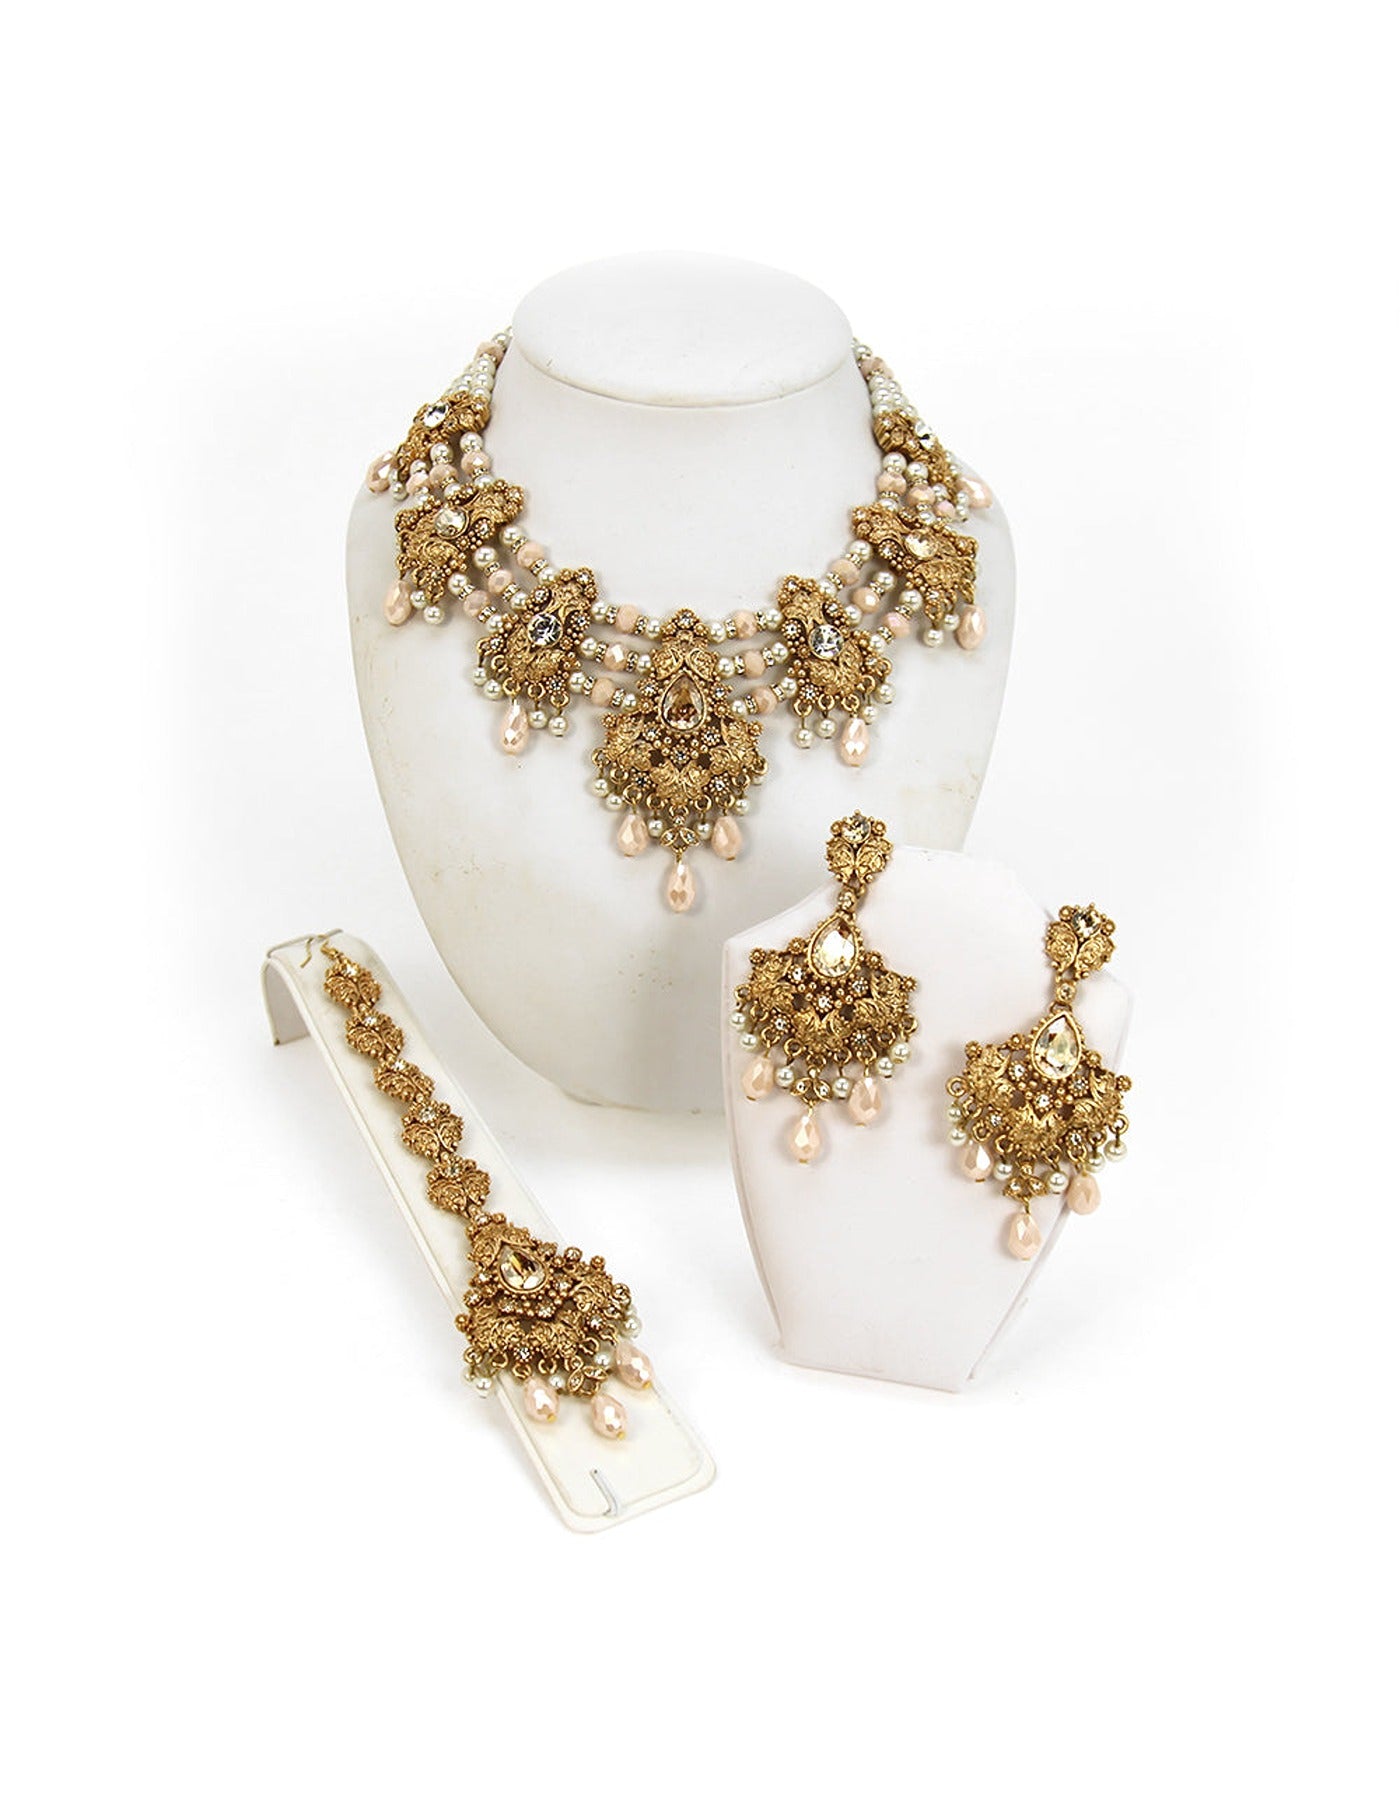 Antique Gold Jewelry with Crystal Golden Shadow and Cream Pearl Accents